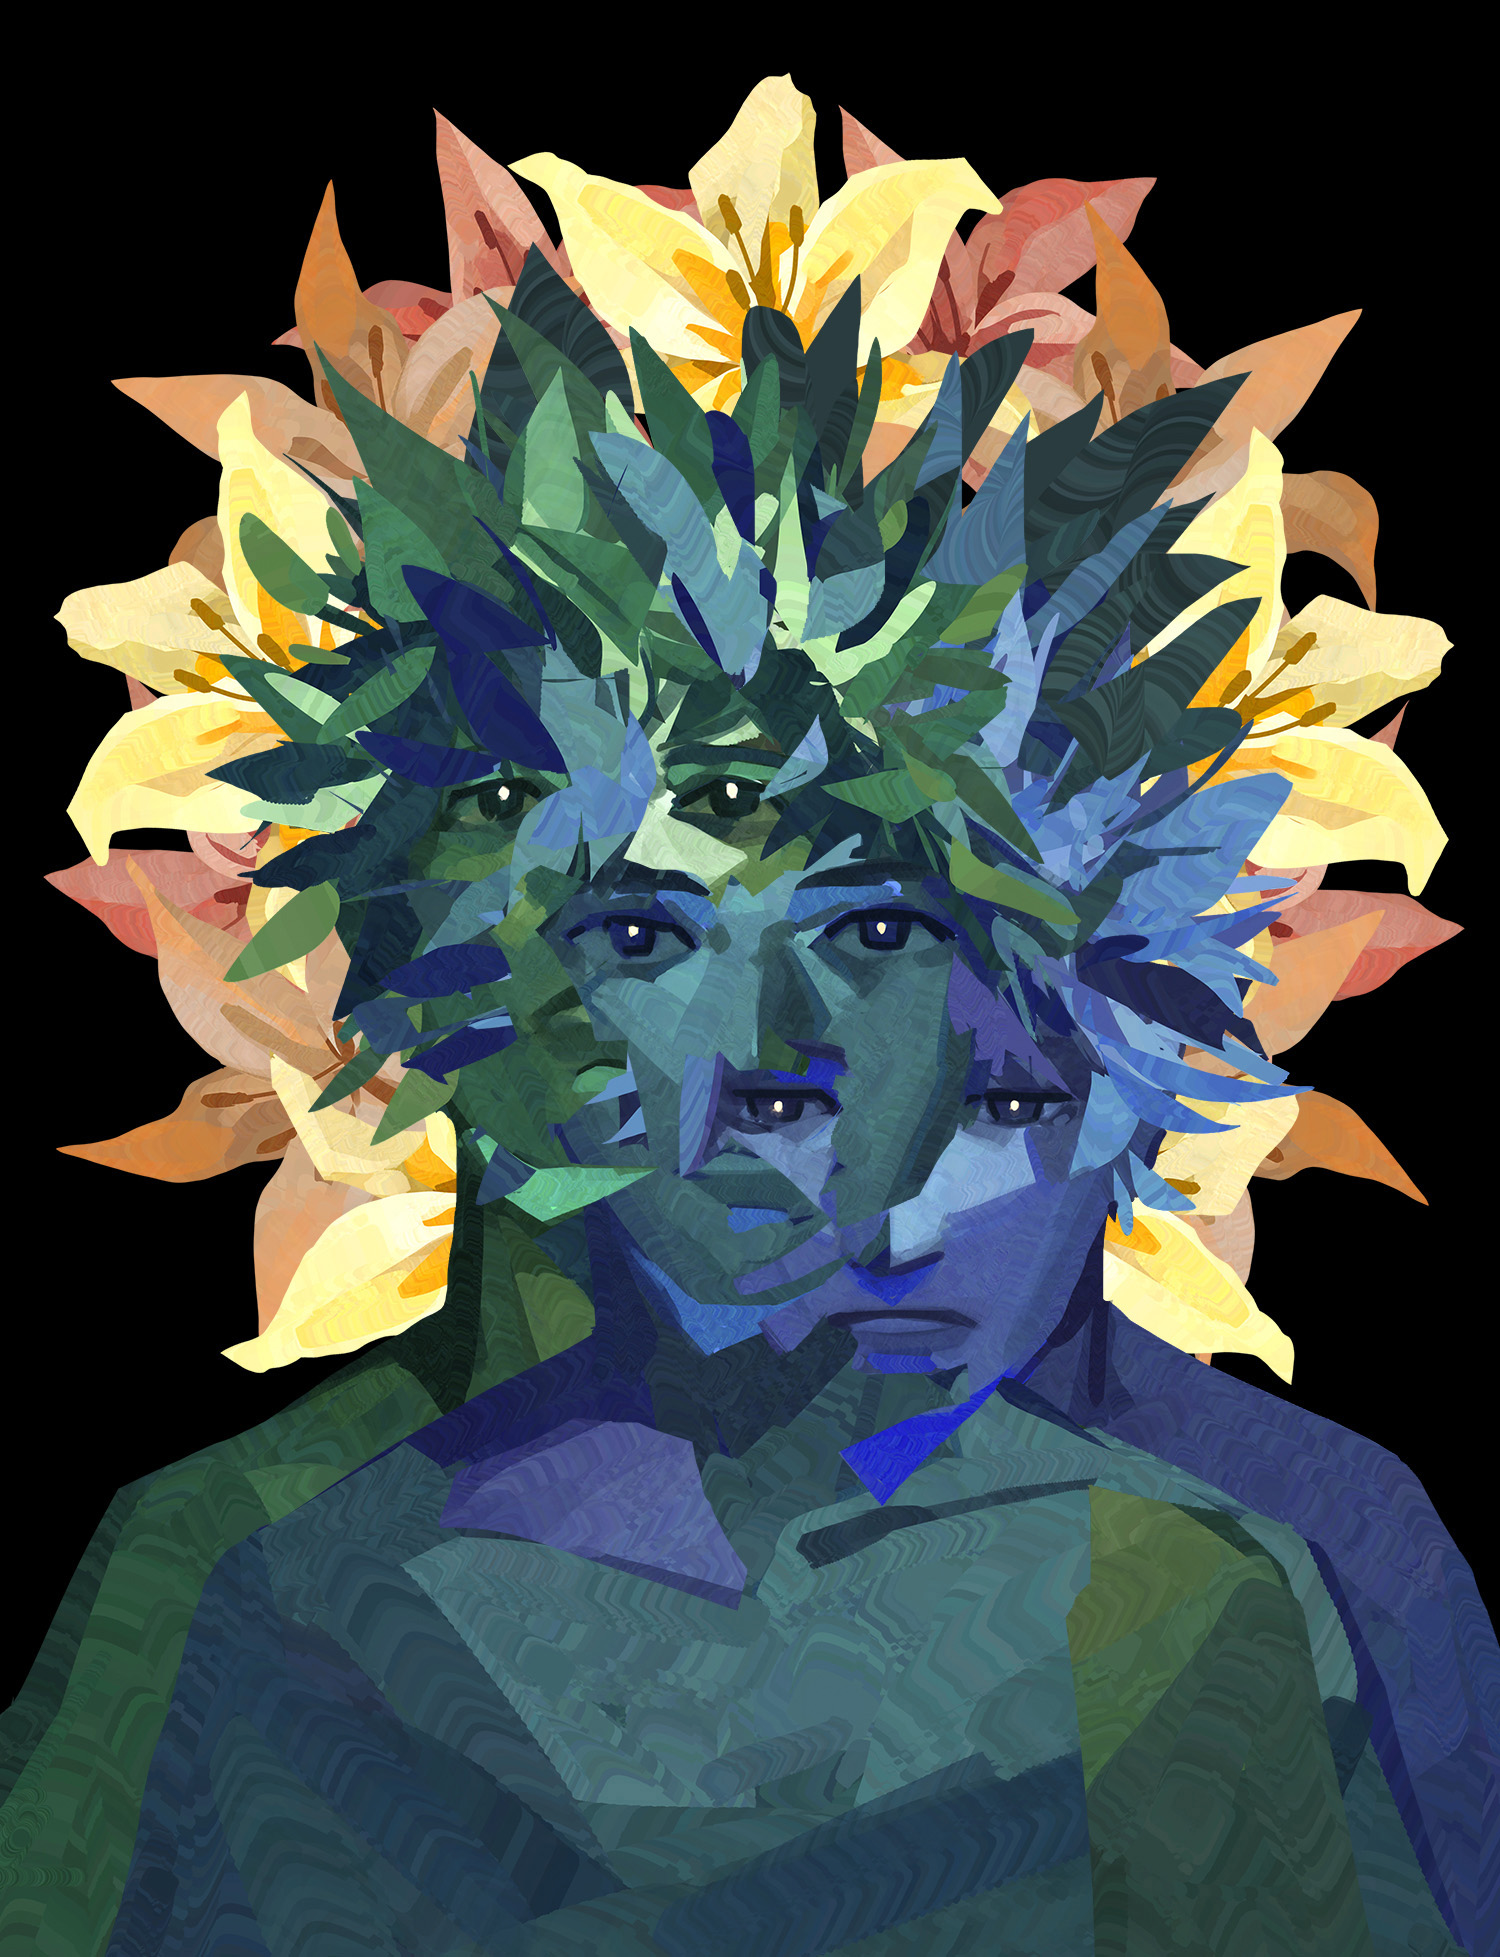 Three figures drawn overlapping and mashed together with leaves and flowers.